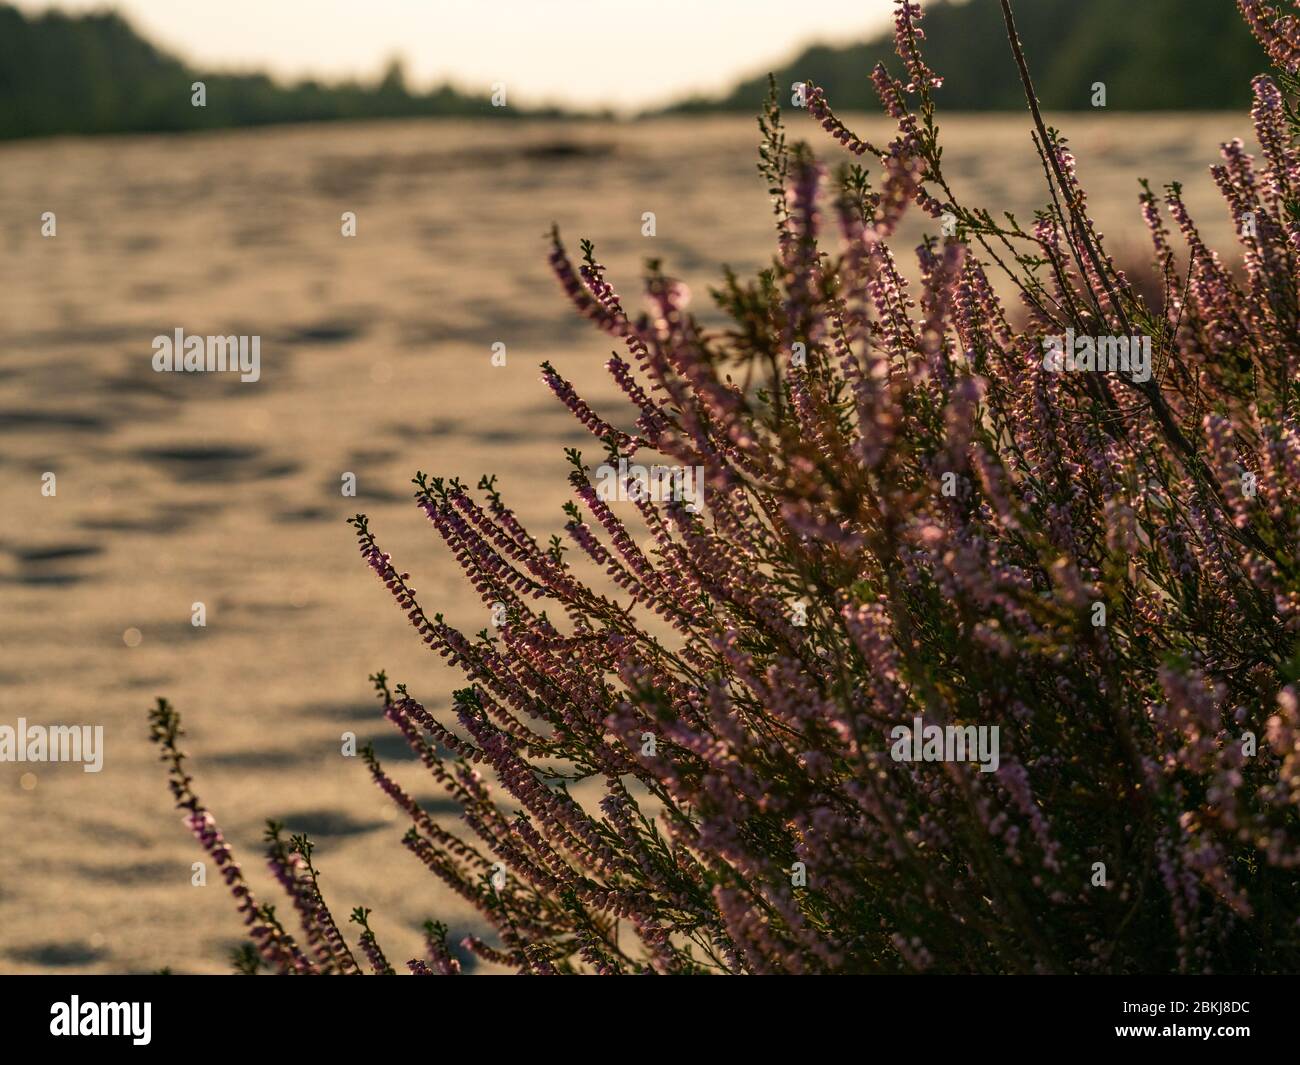 Heather bush growing on dunes of former training military ground. Sunset. Selective focus. Stock Photo